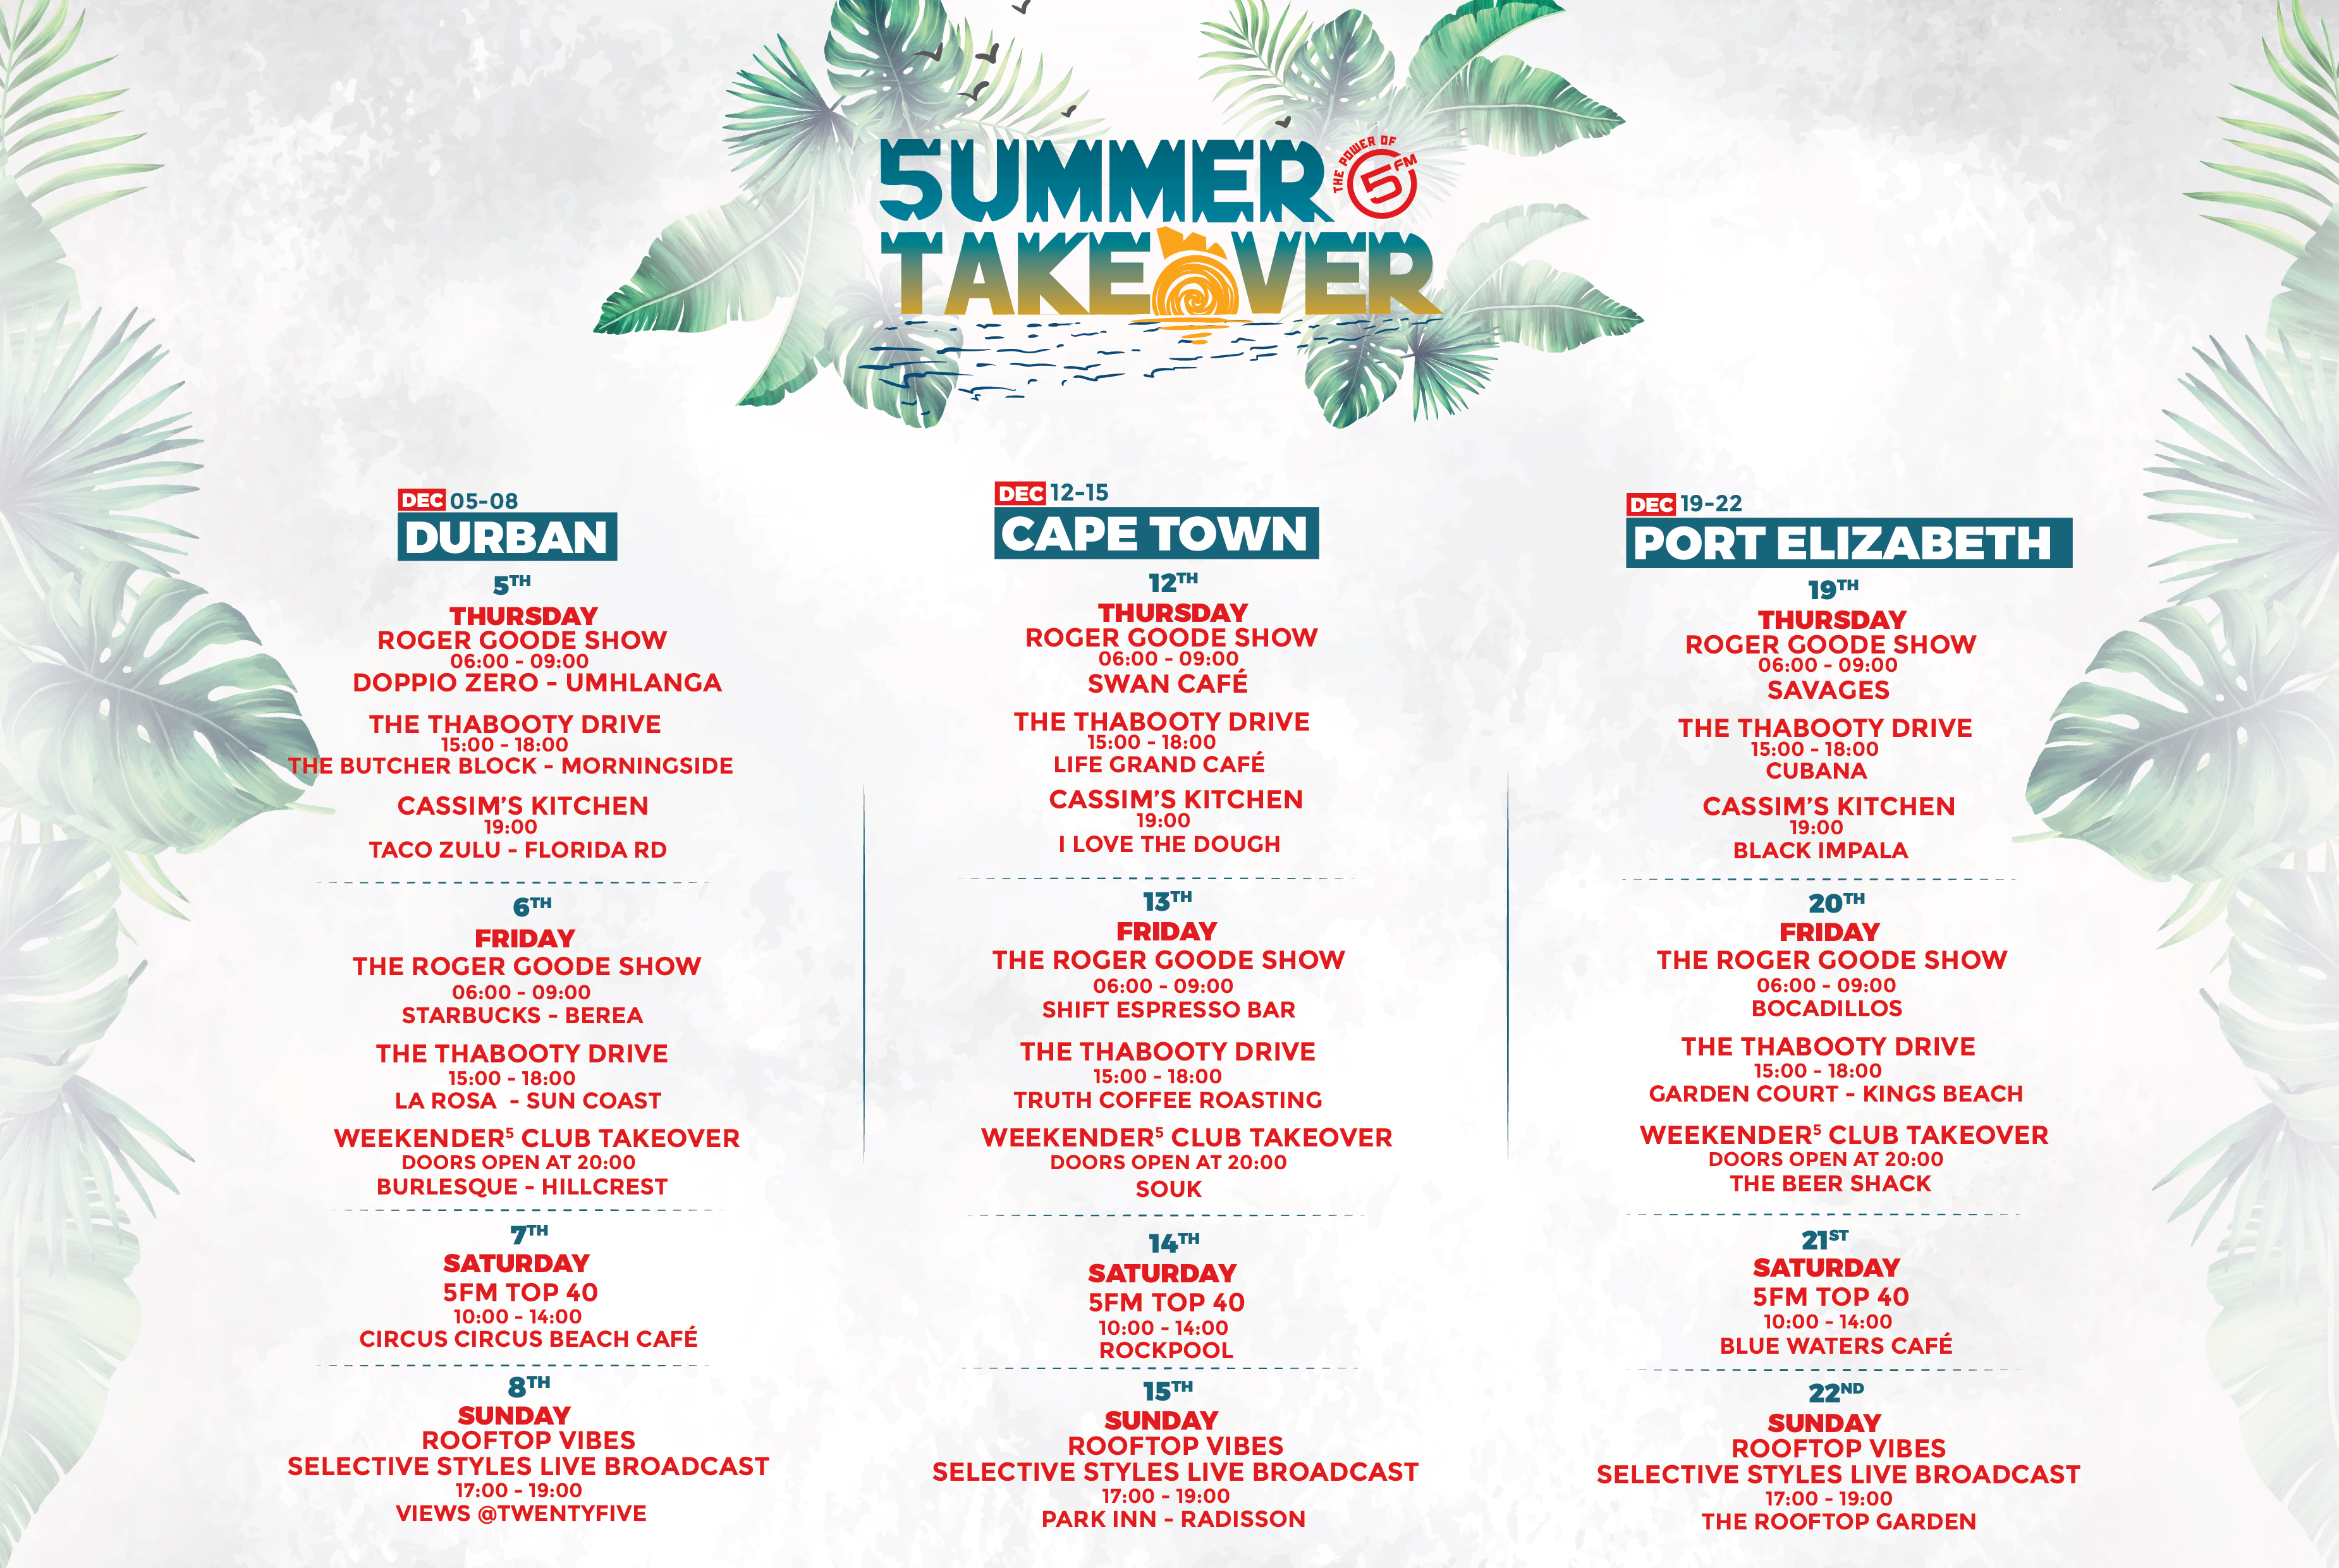 5FM launches its 'Summer Takeover' campaign